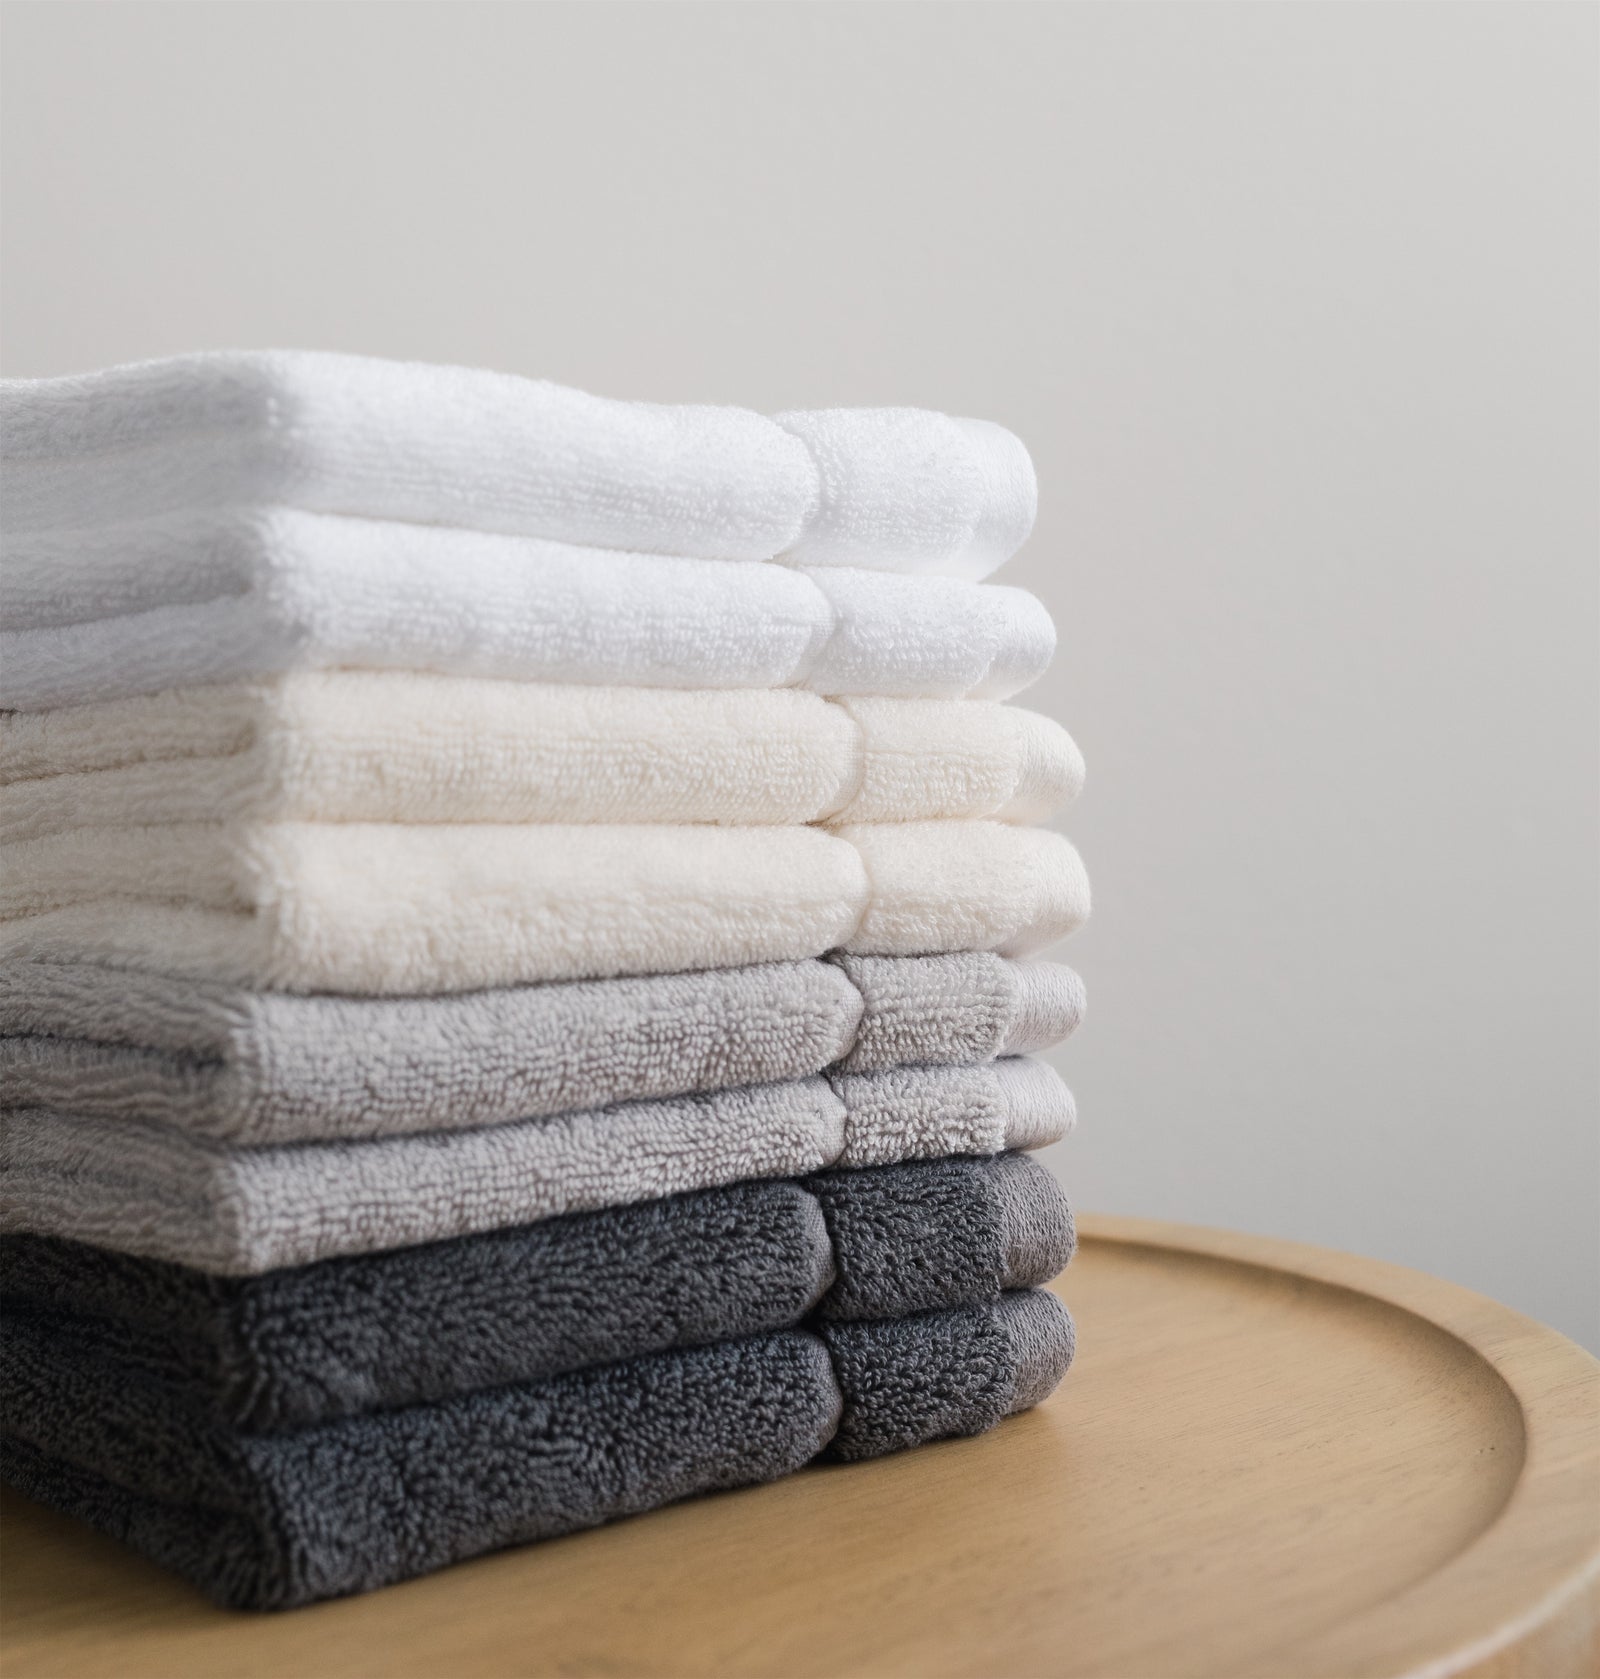 White, Light Grey, Charcoal, Creme Wash cloths stacked on top of each other. There is a white wall in the background. The towels are resting on a wooden stool.